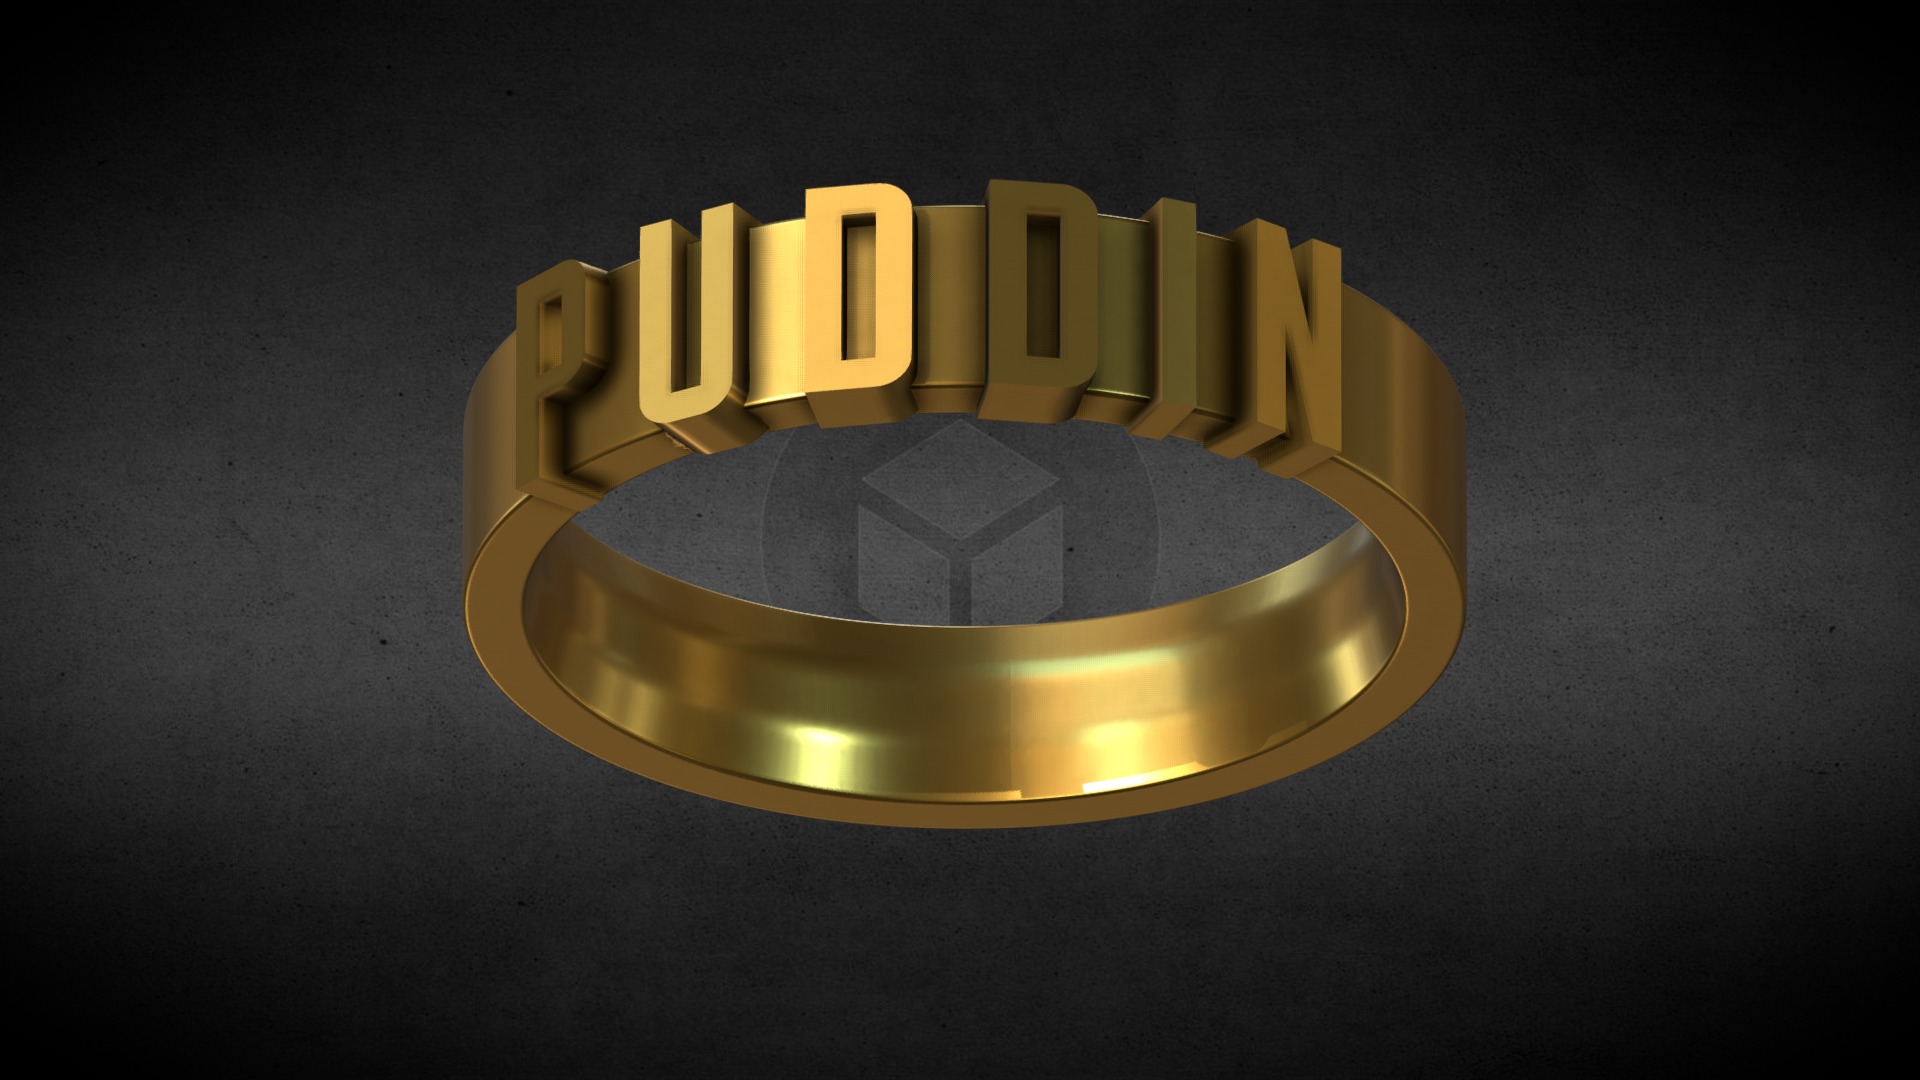 Model is fully ready for 3d printing of plastic, metal or jewelry wax! - PUDDIN  Harley Quinn ring for 3d printing - 3D model by roman_kharikov 3d model